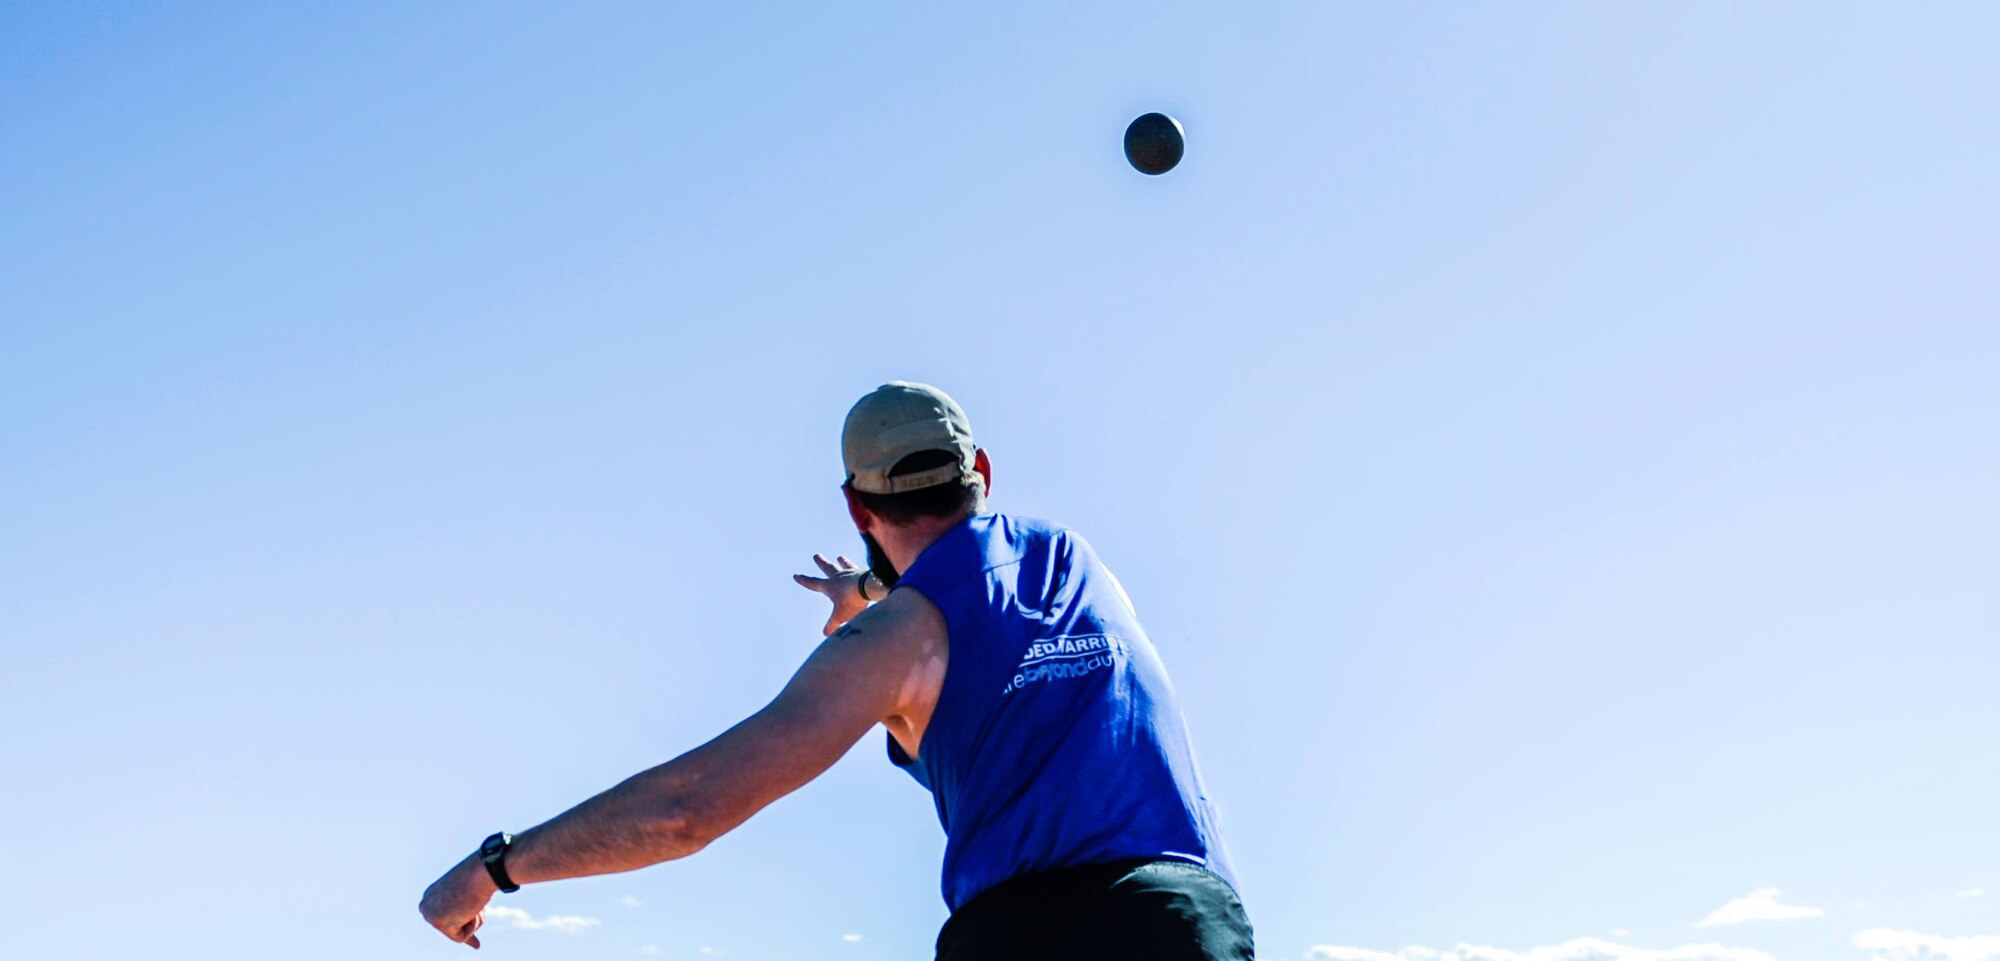 An Air Force Wounded Warrior Trials athlete throws a shot-put during the field competition of the AFW2 at Nellis Air Force Base, Nev., Feb. 28, 2017. Athletes from the United States, the United Kingdom and Australia came to compete for a spot in the 2017 Air Force wounded Warrior team. (U.S. Air Force photo by Airman 1st Class Kevin Tanenbaum/Released)